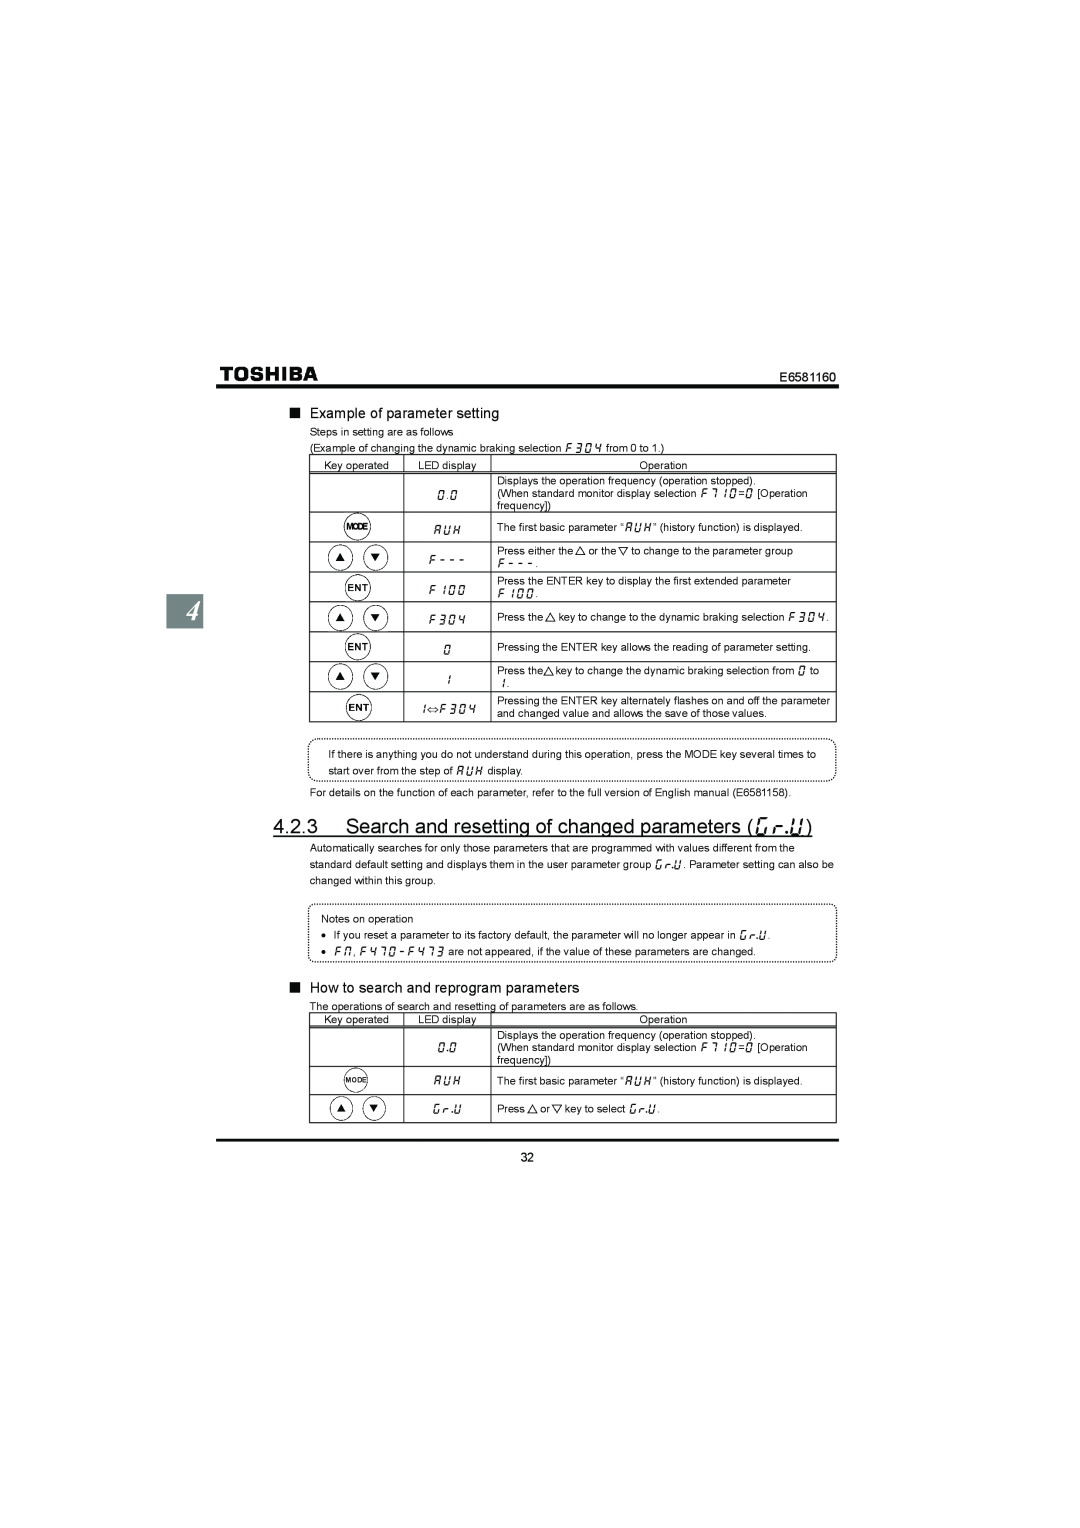 Toshiba VF-S11 manual QExample of parameter setting, QHow to search and reprogram parameters, E6581160 